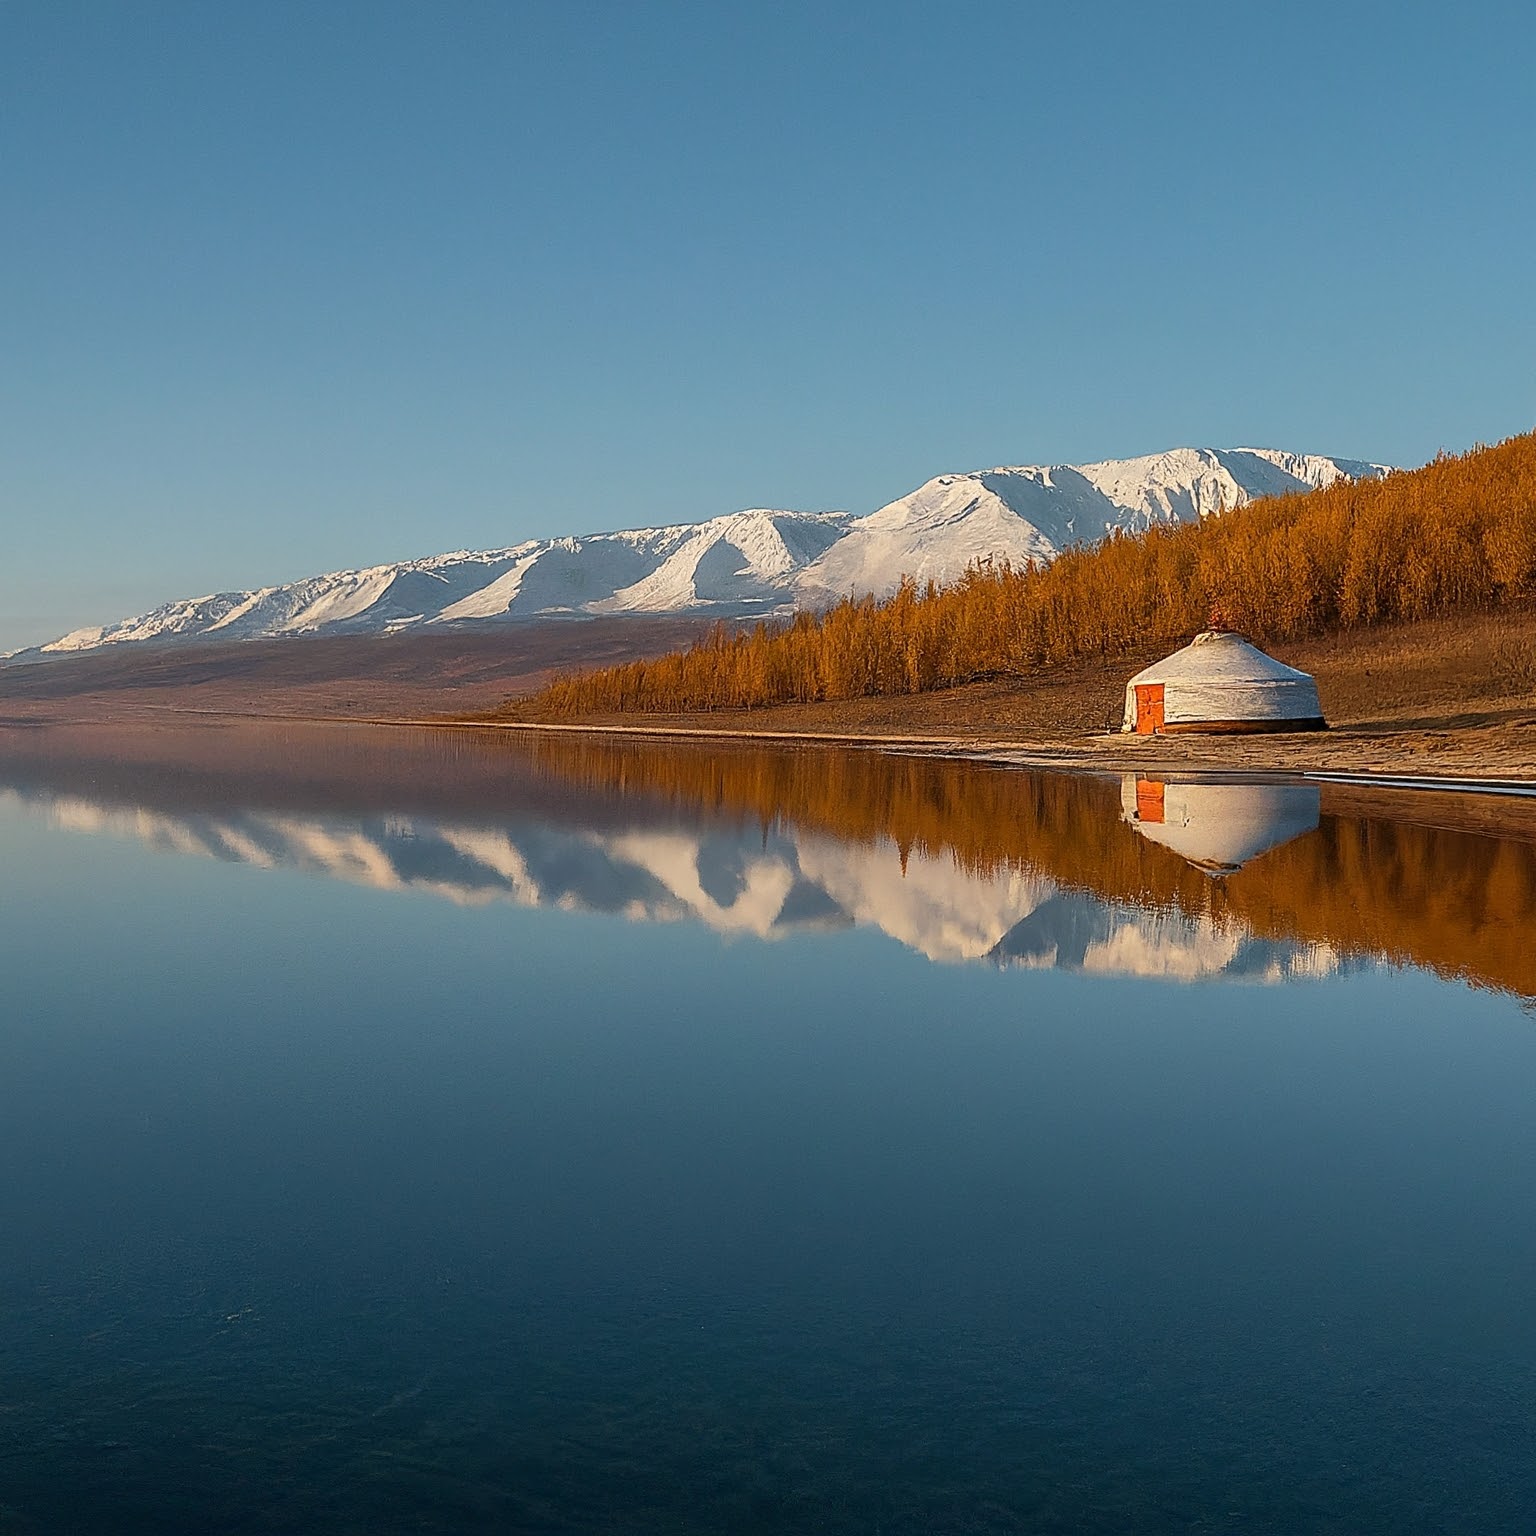 Traditional Mongolian yurt on the shore of Lake Hovsgol, Mongolia, with mountains reflected in the water at sunrise.